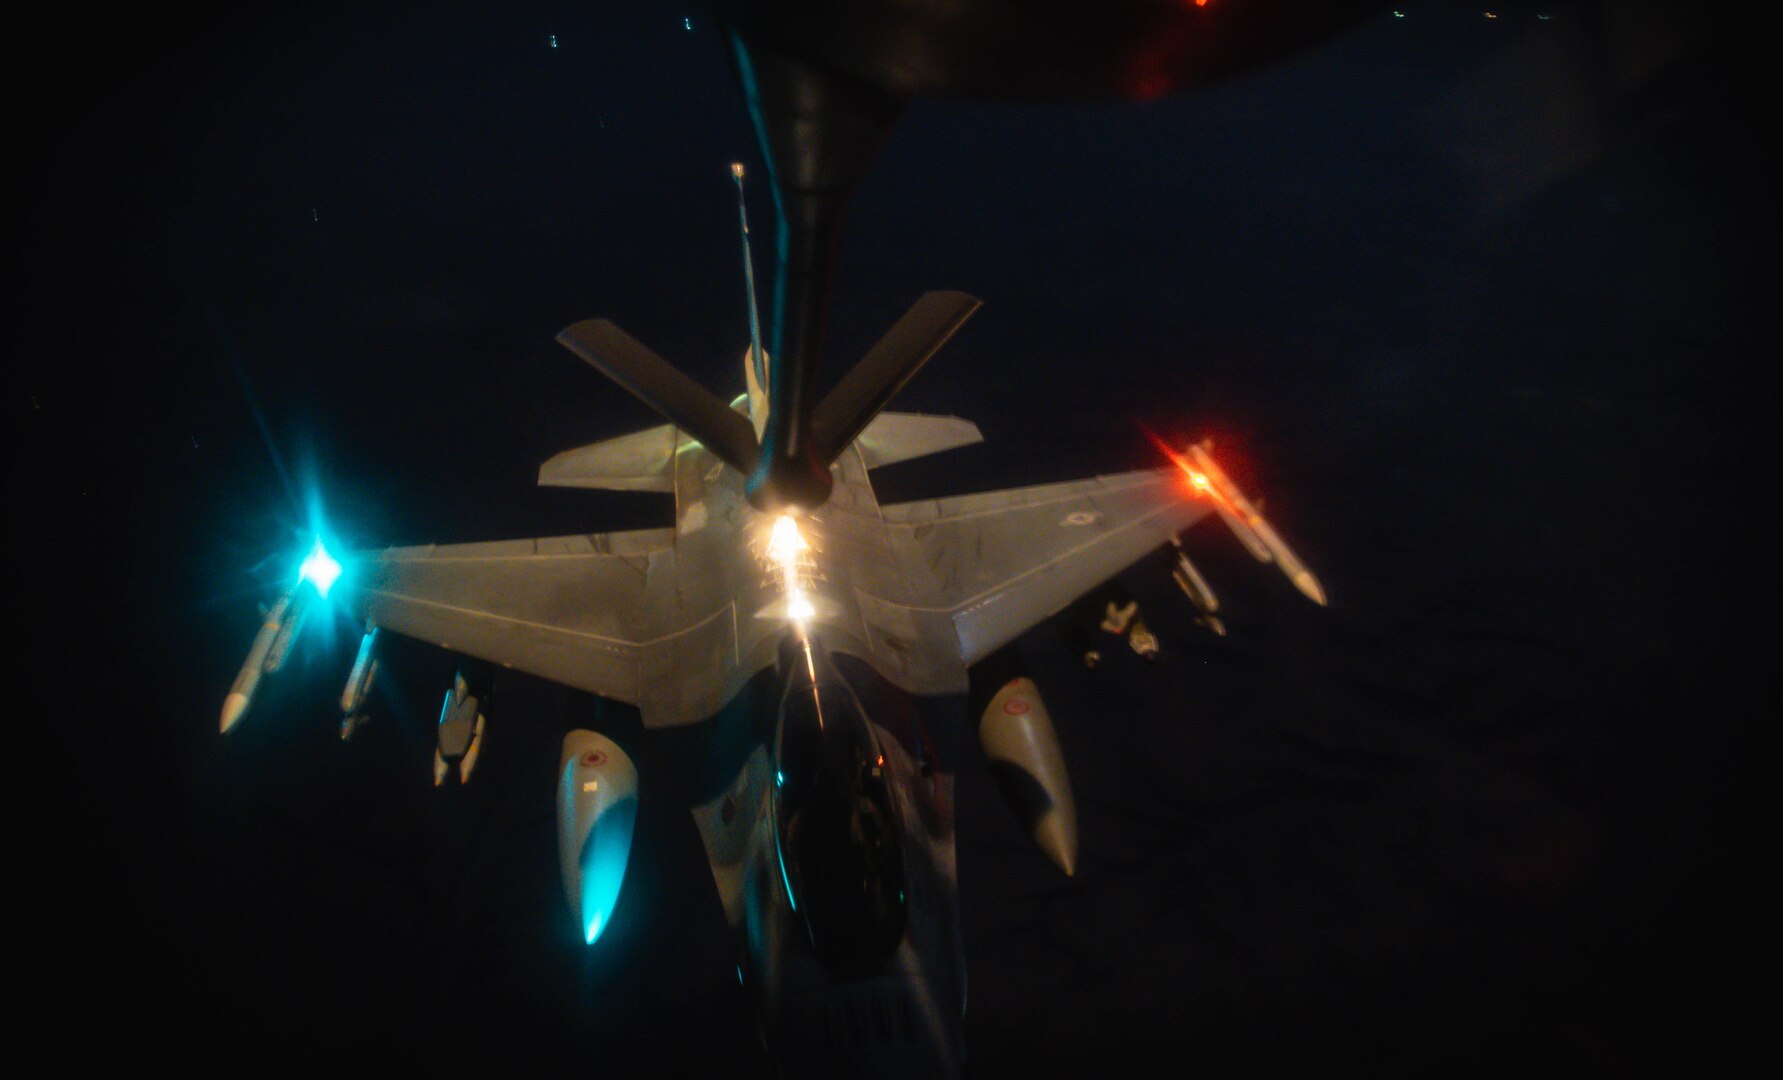 An airborne aircraft with red and blue lights receives fuel at night.